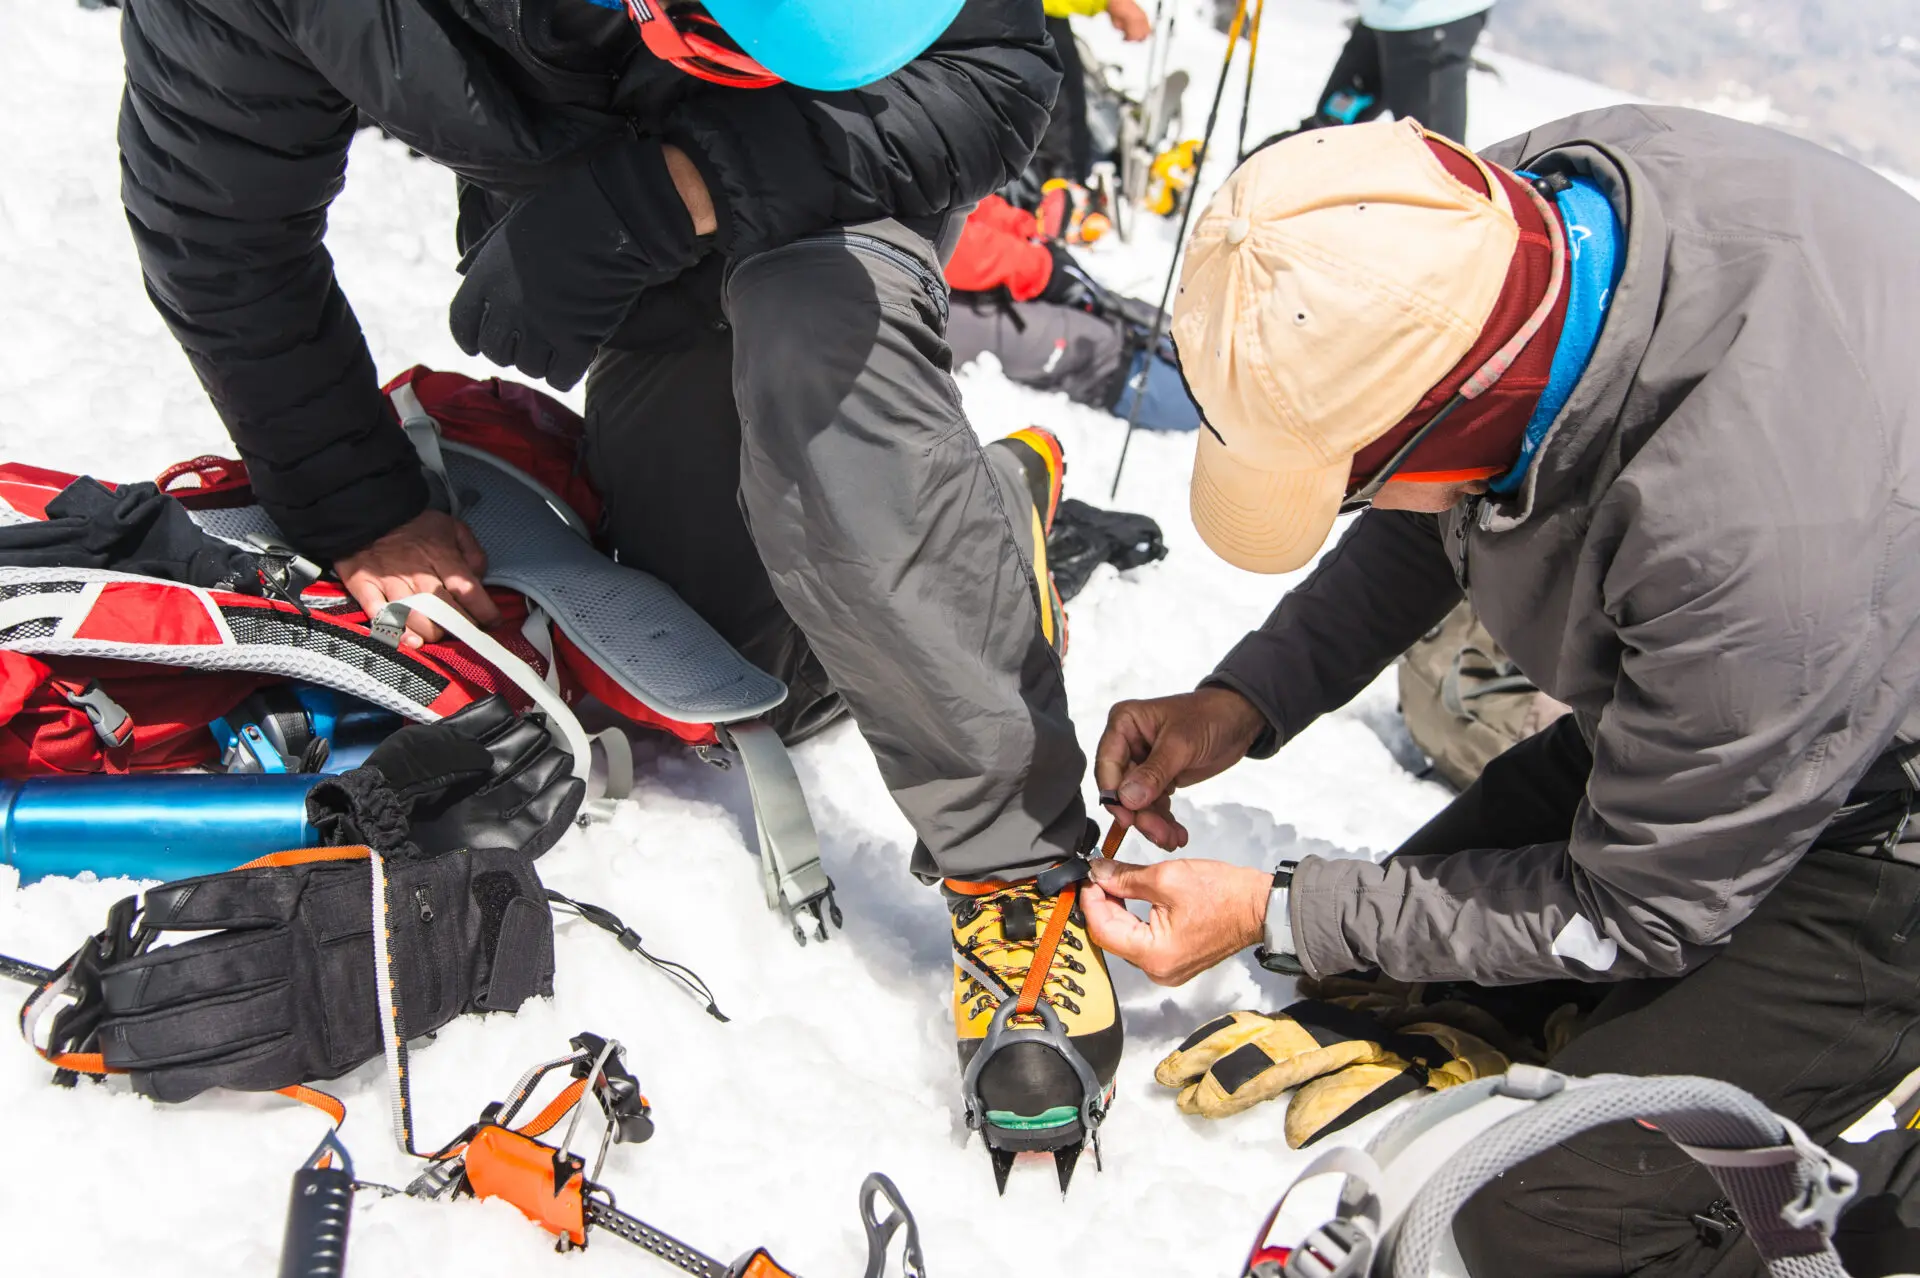 A professional guide helps you set up and dress alpinist crampons for a beginner mountaineer before climbing